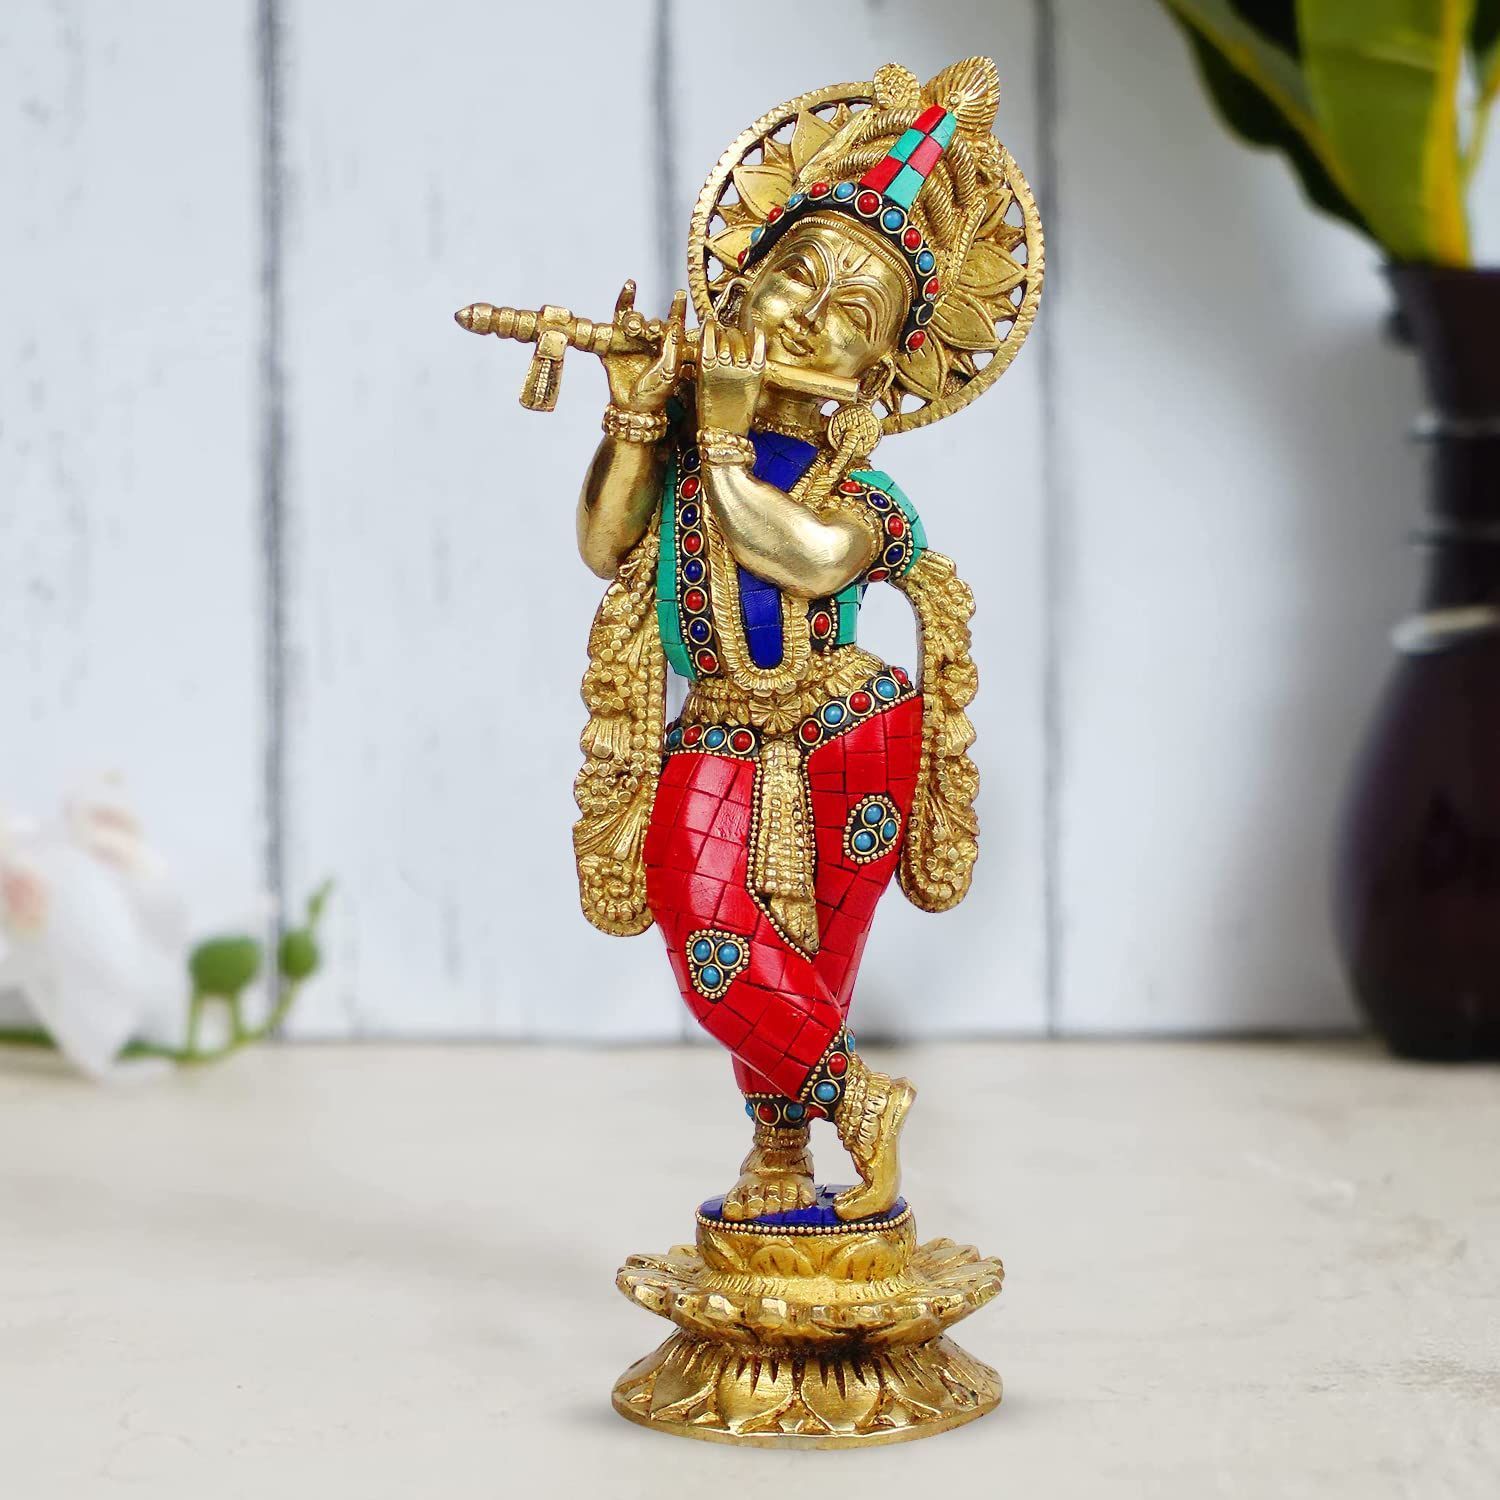 Buy TIED RIBBONS Gold Plated Radha Krishna Idol Statue Showpiece (Resin, 19  cm x 11 cm) - Decoration Items for Home Decor Living Room Mandir Temple  Pooja Room Table Top Office Decorative